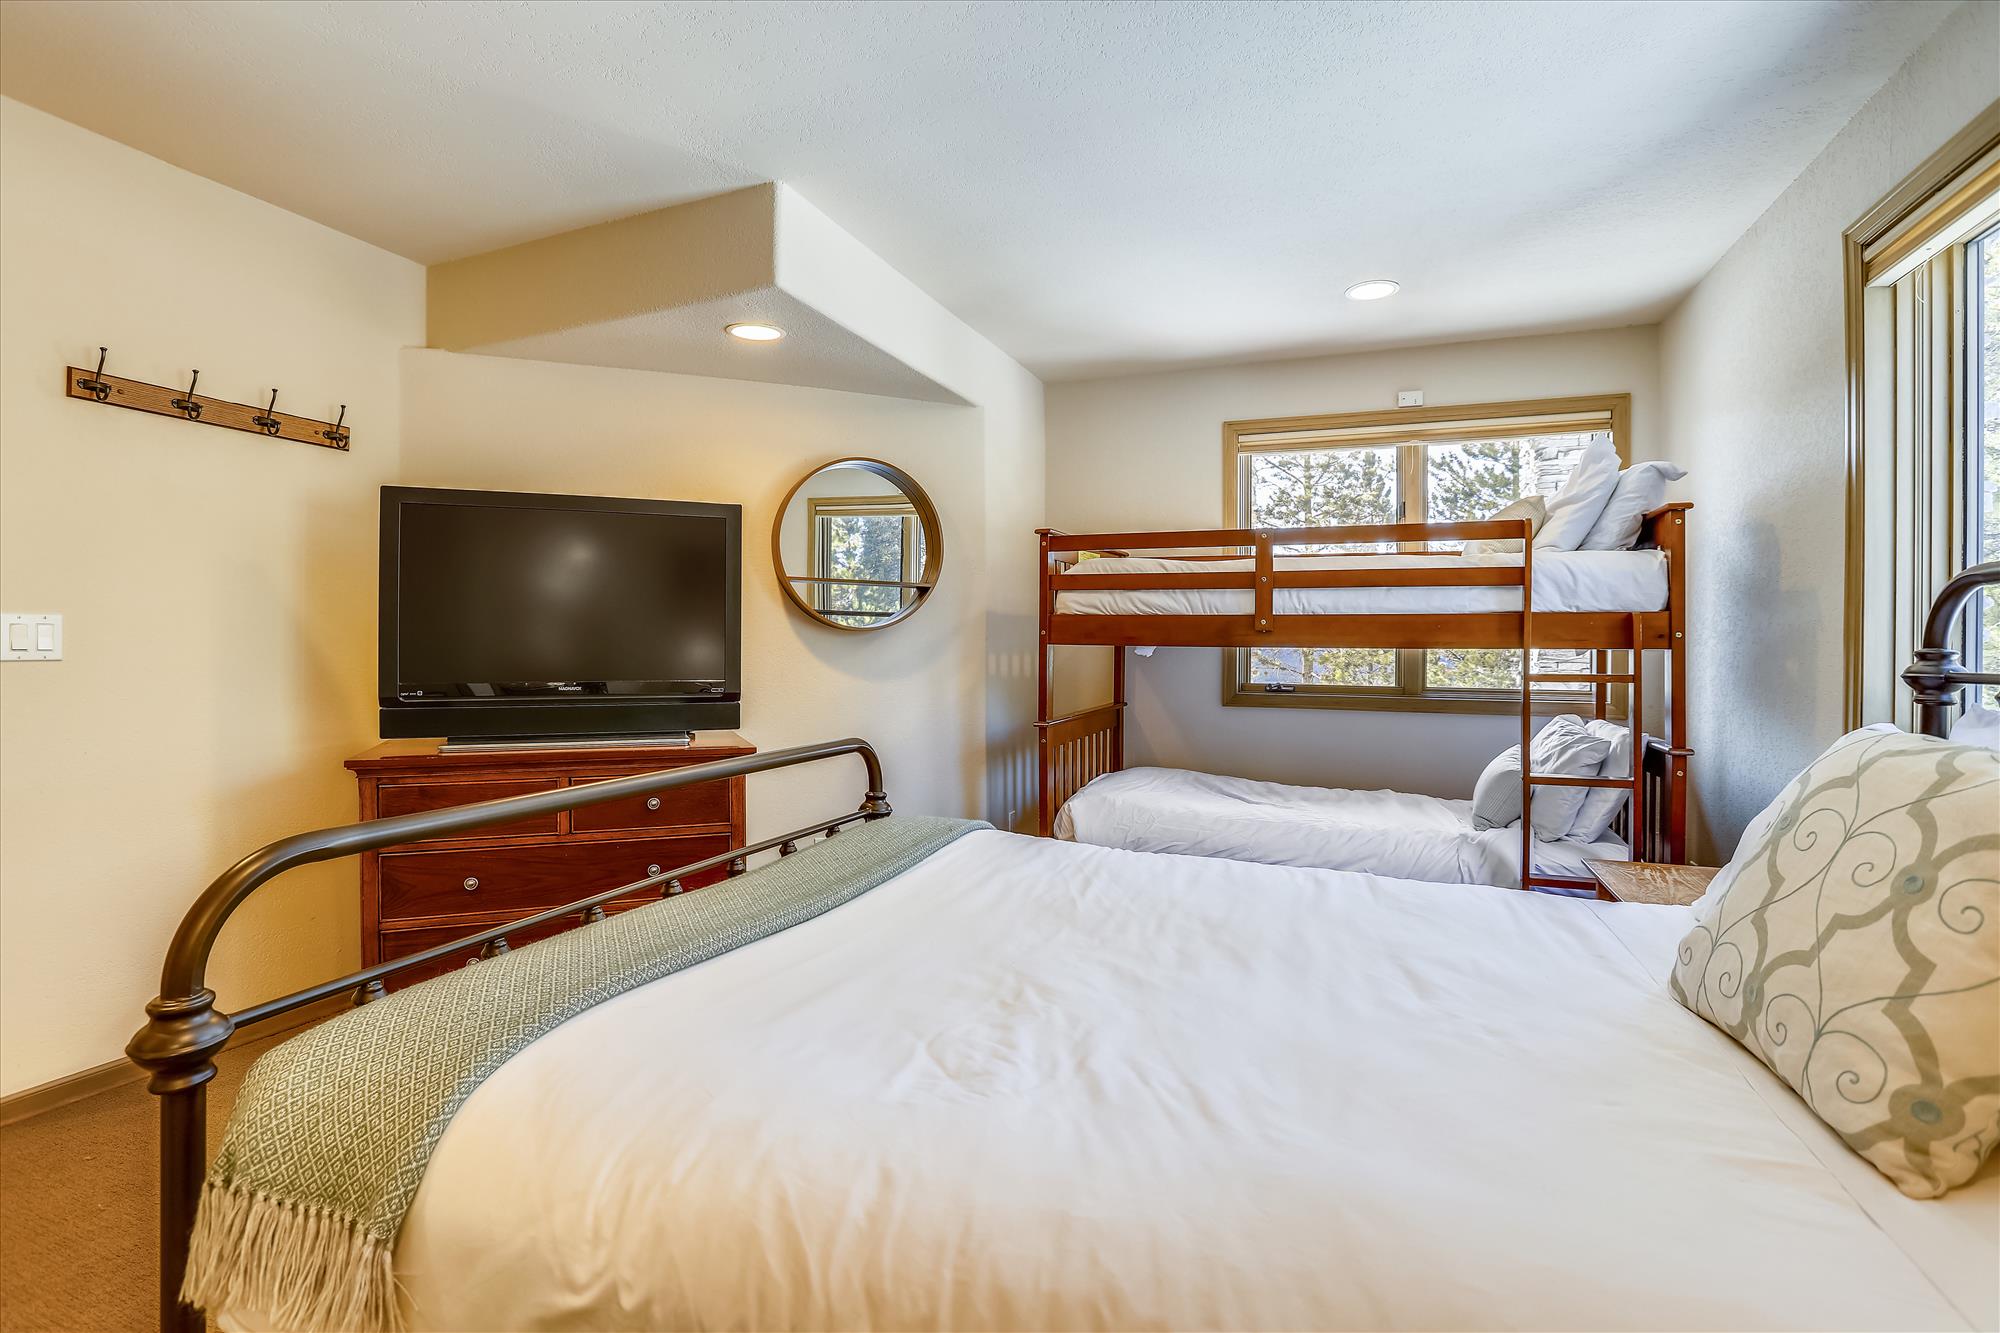 Unwind in this bunk room with lots of space and a flat screen TV.